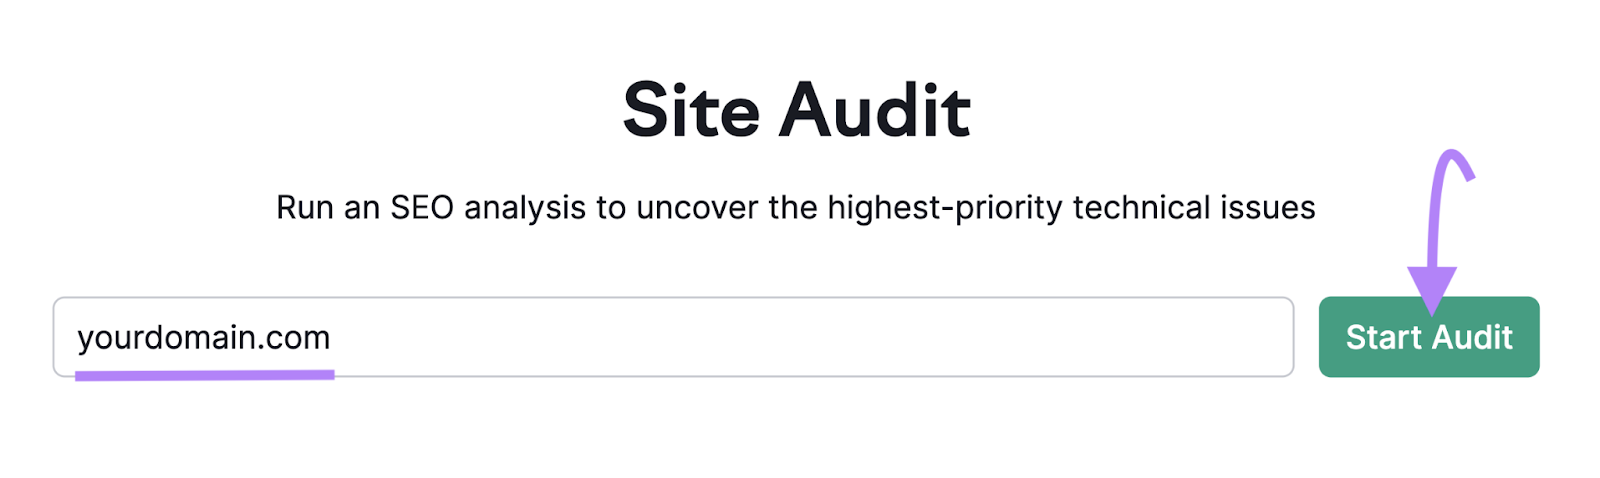 Site Audit interface to add a domain name, with yourdomain.com entered.